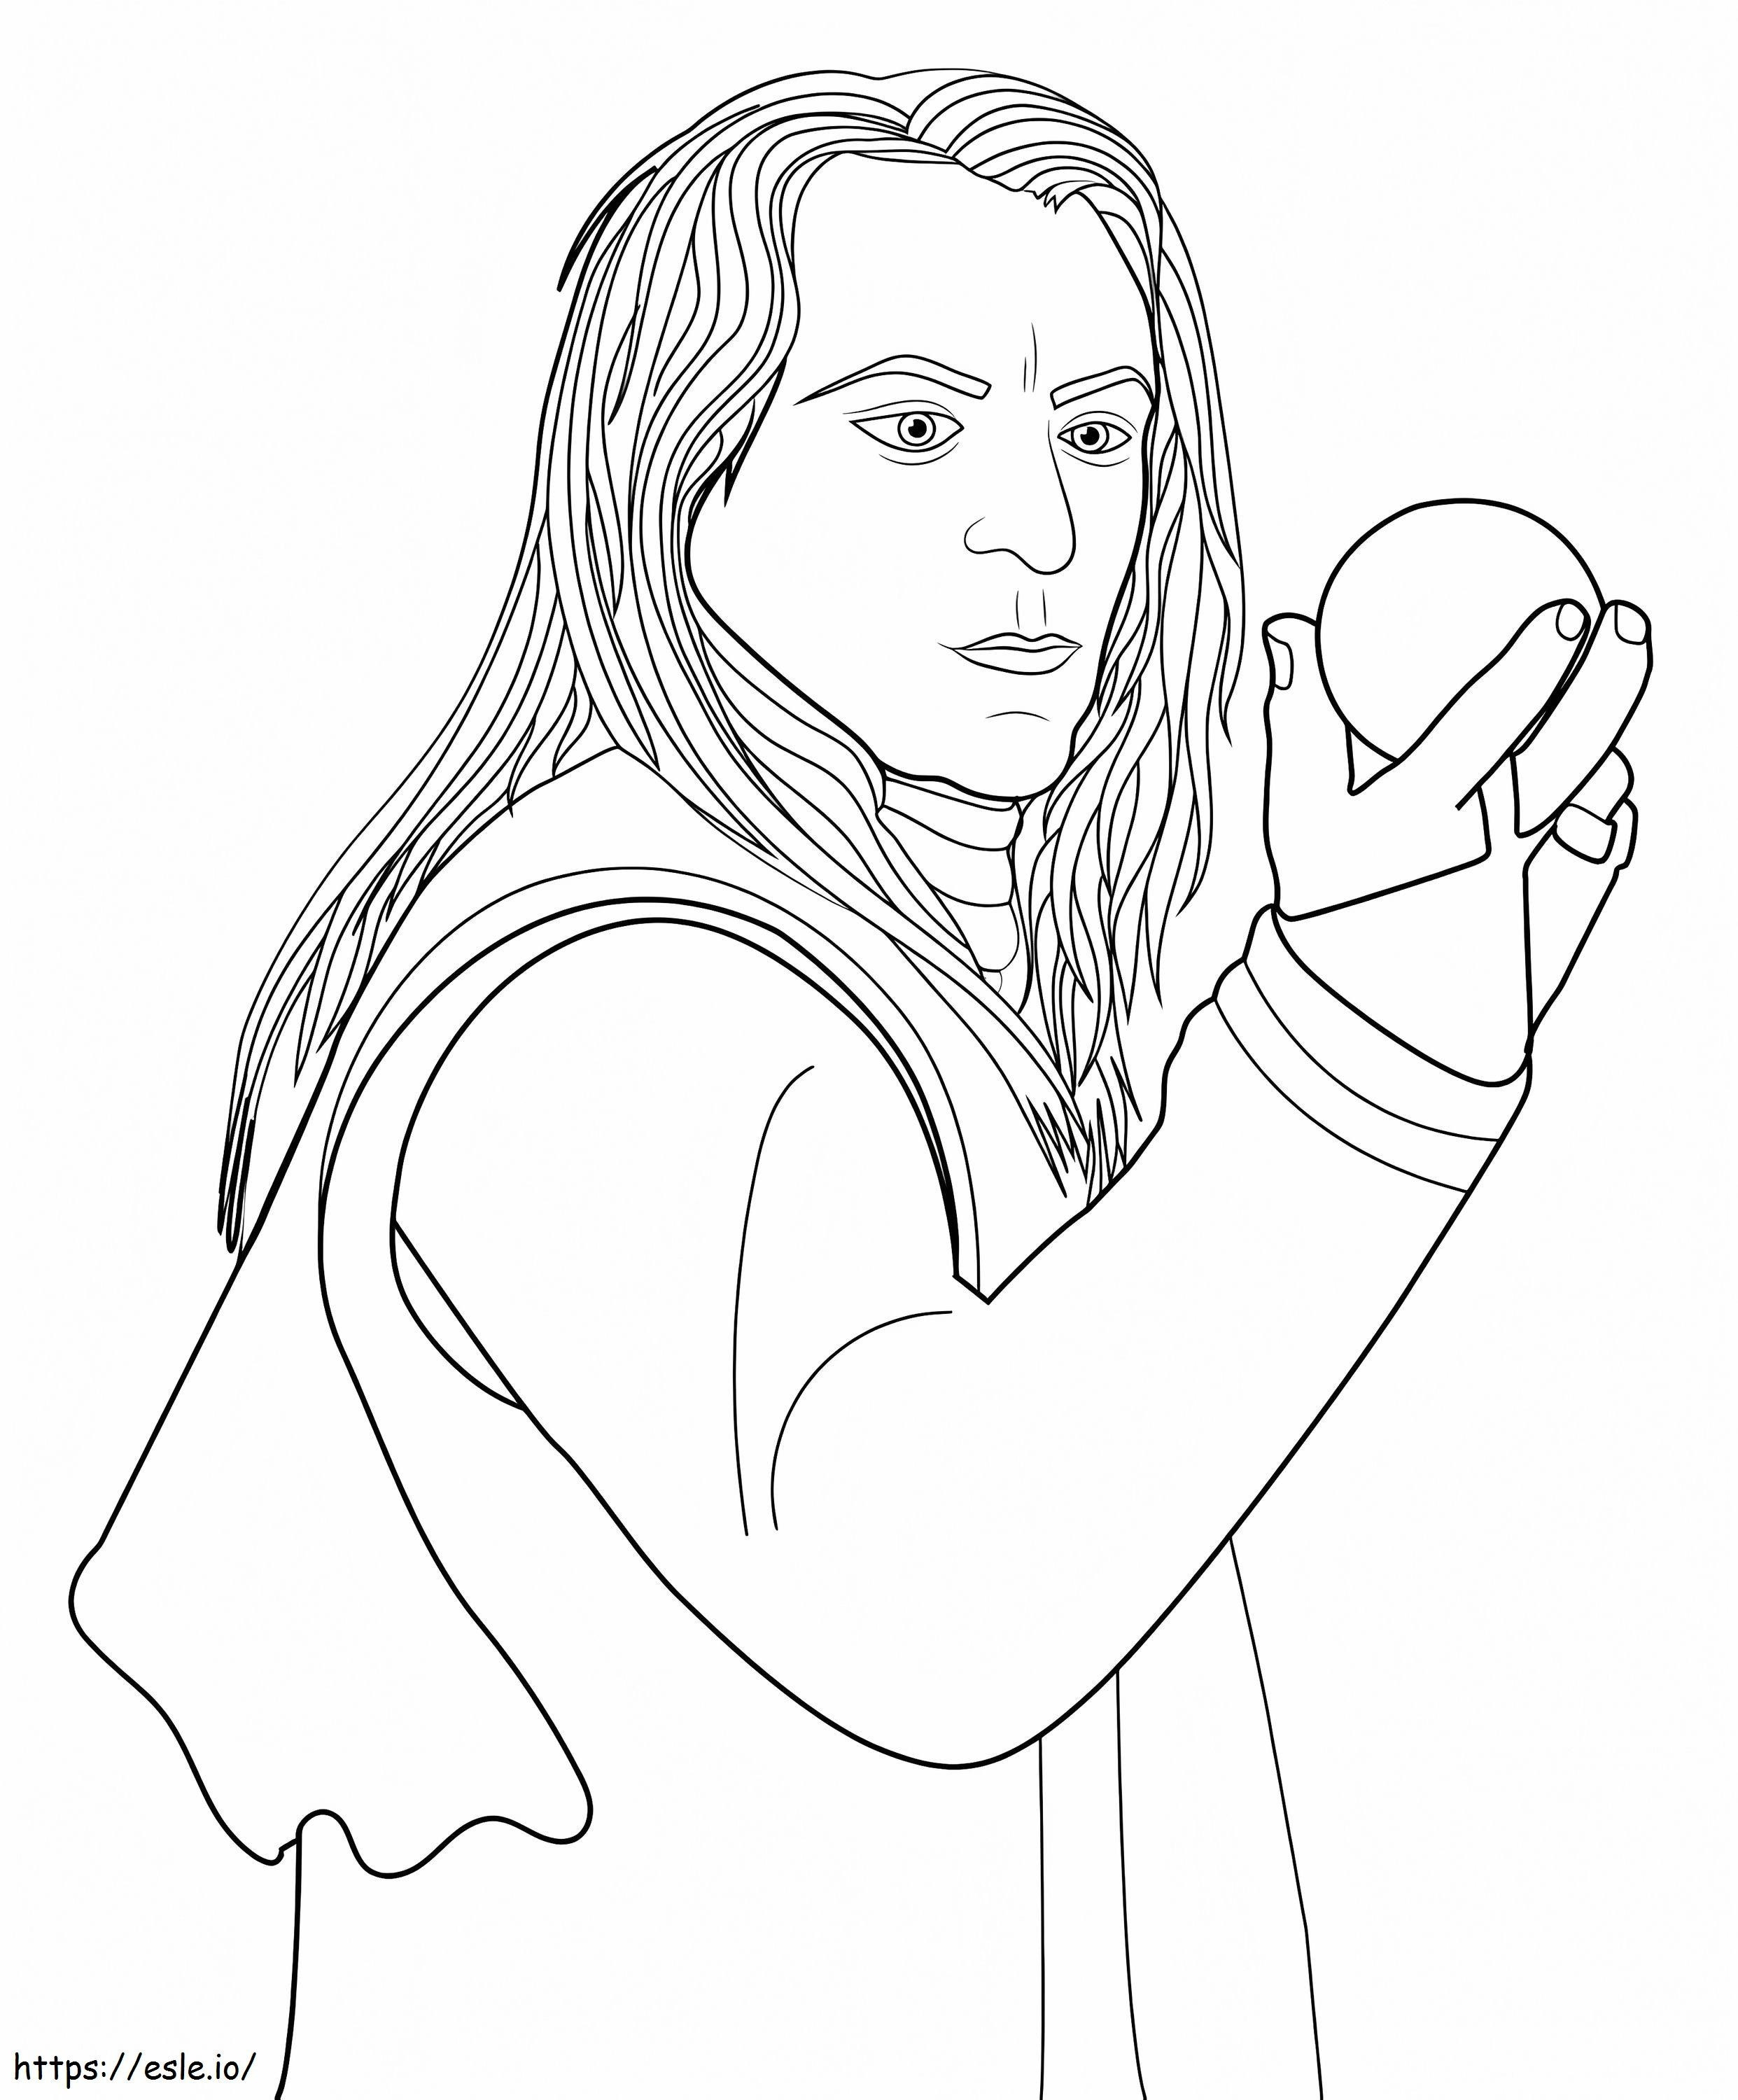 Lucius Malfoy From Harry Potter coloring page